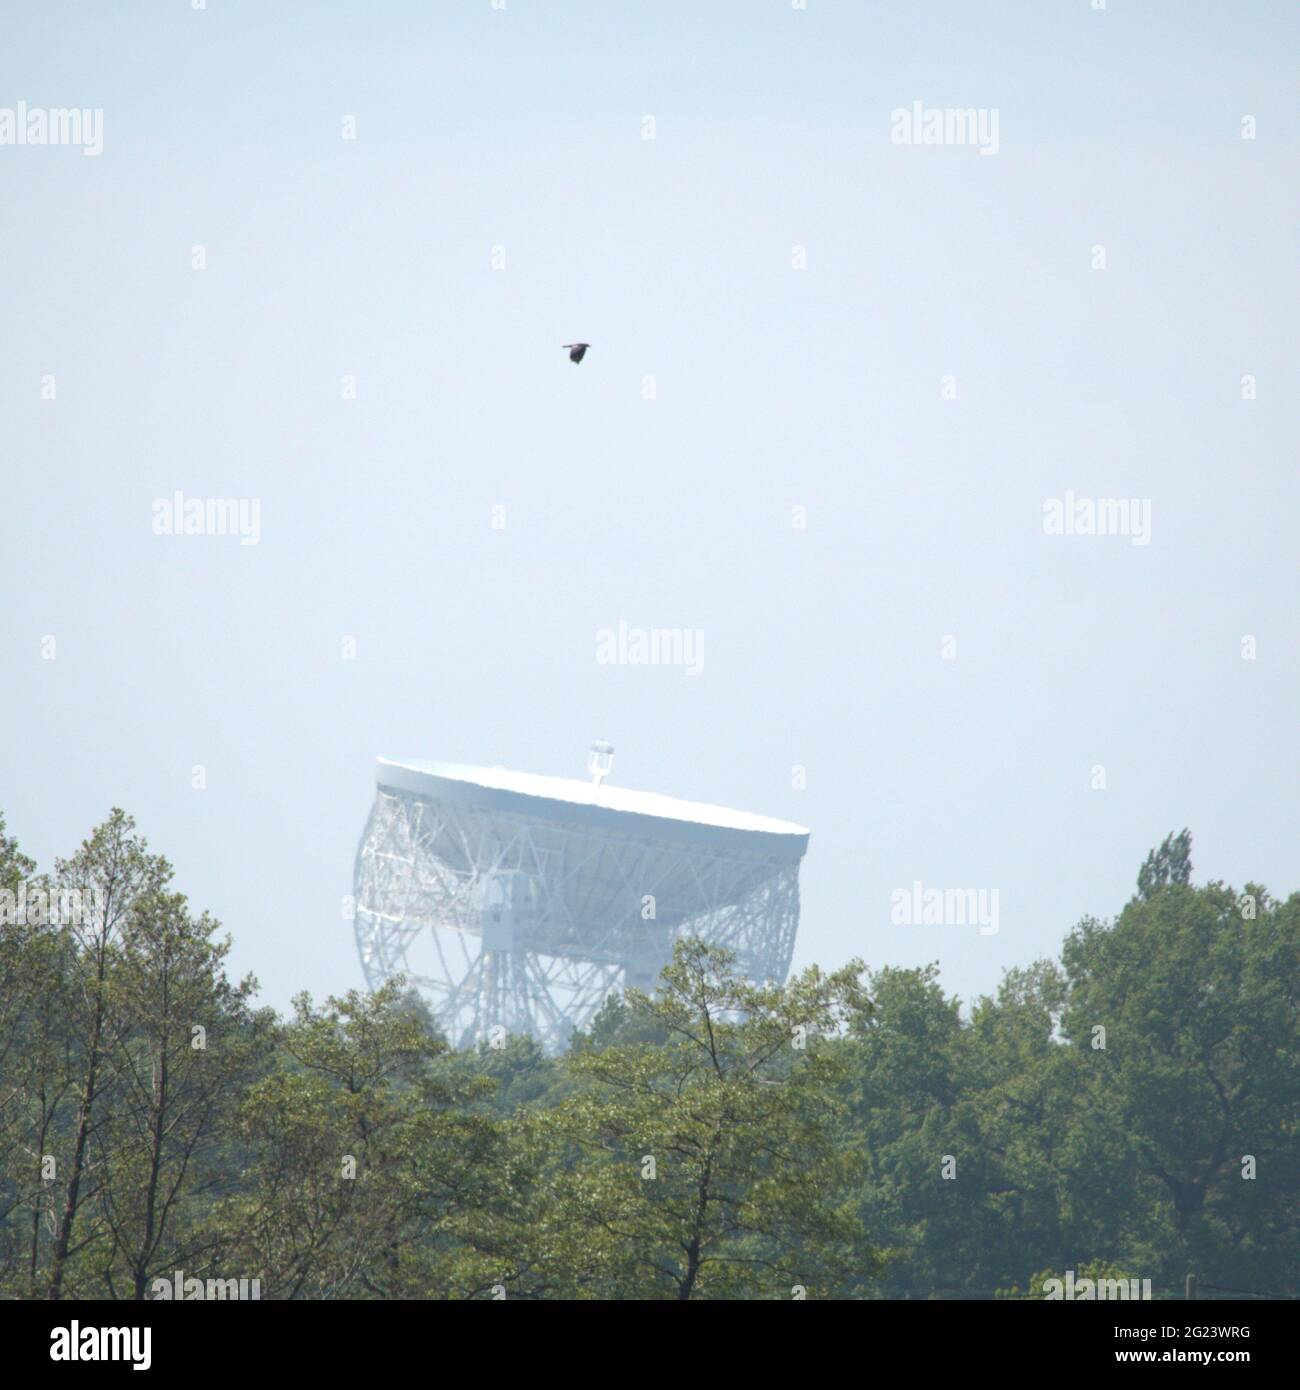 View of the Lovell Telescope from the front Lawn of Capesthorn Hall Stock Photo